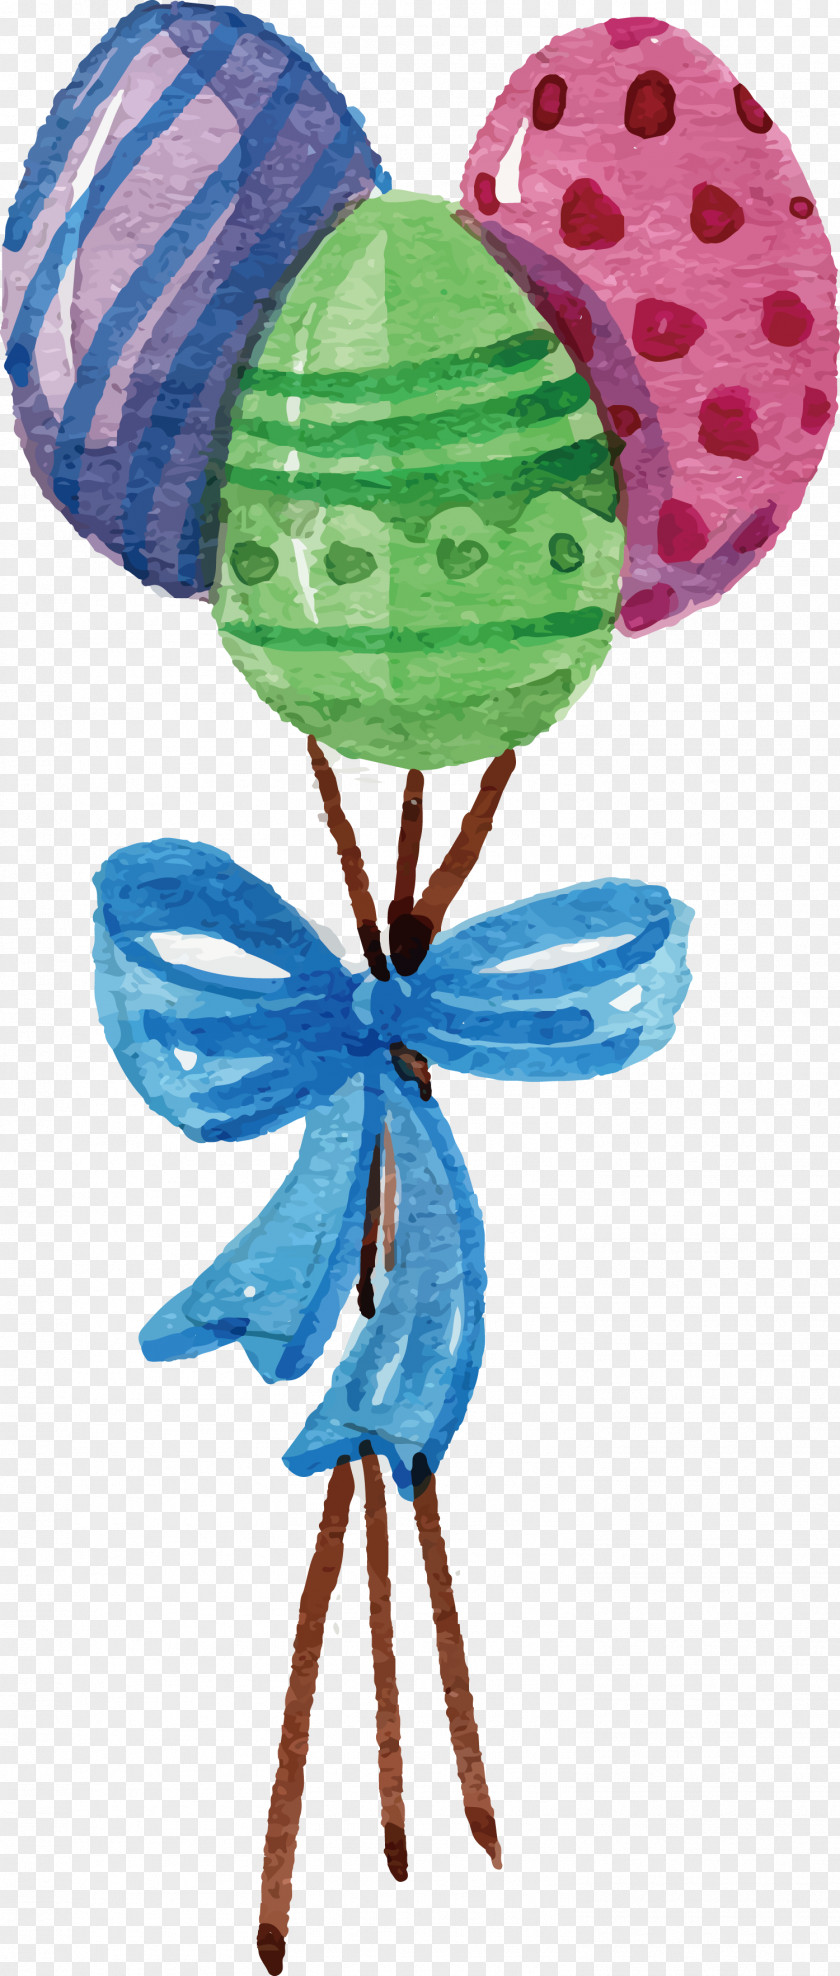 Watercolor Easter Egg Bunny Painting PNG